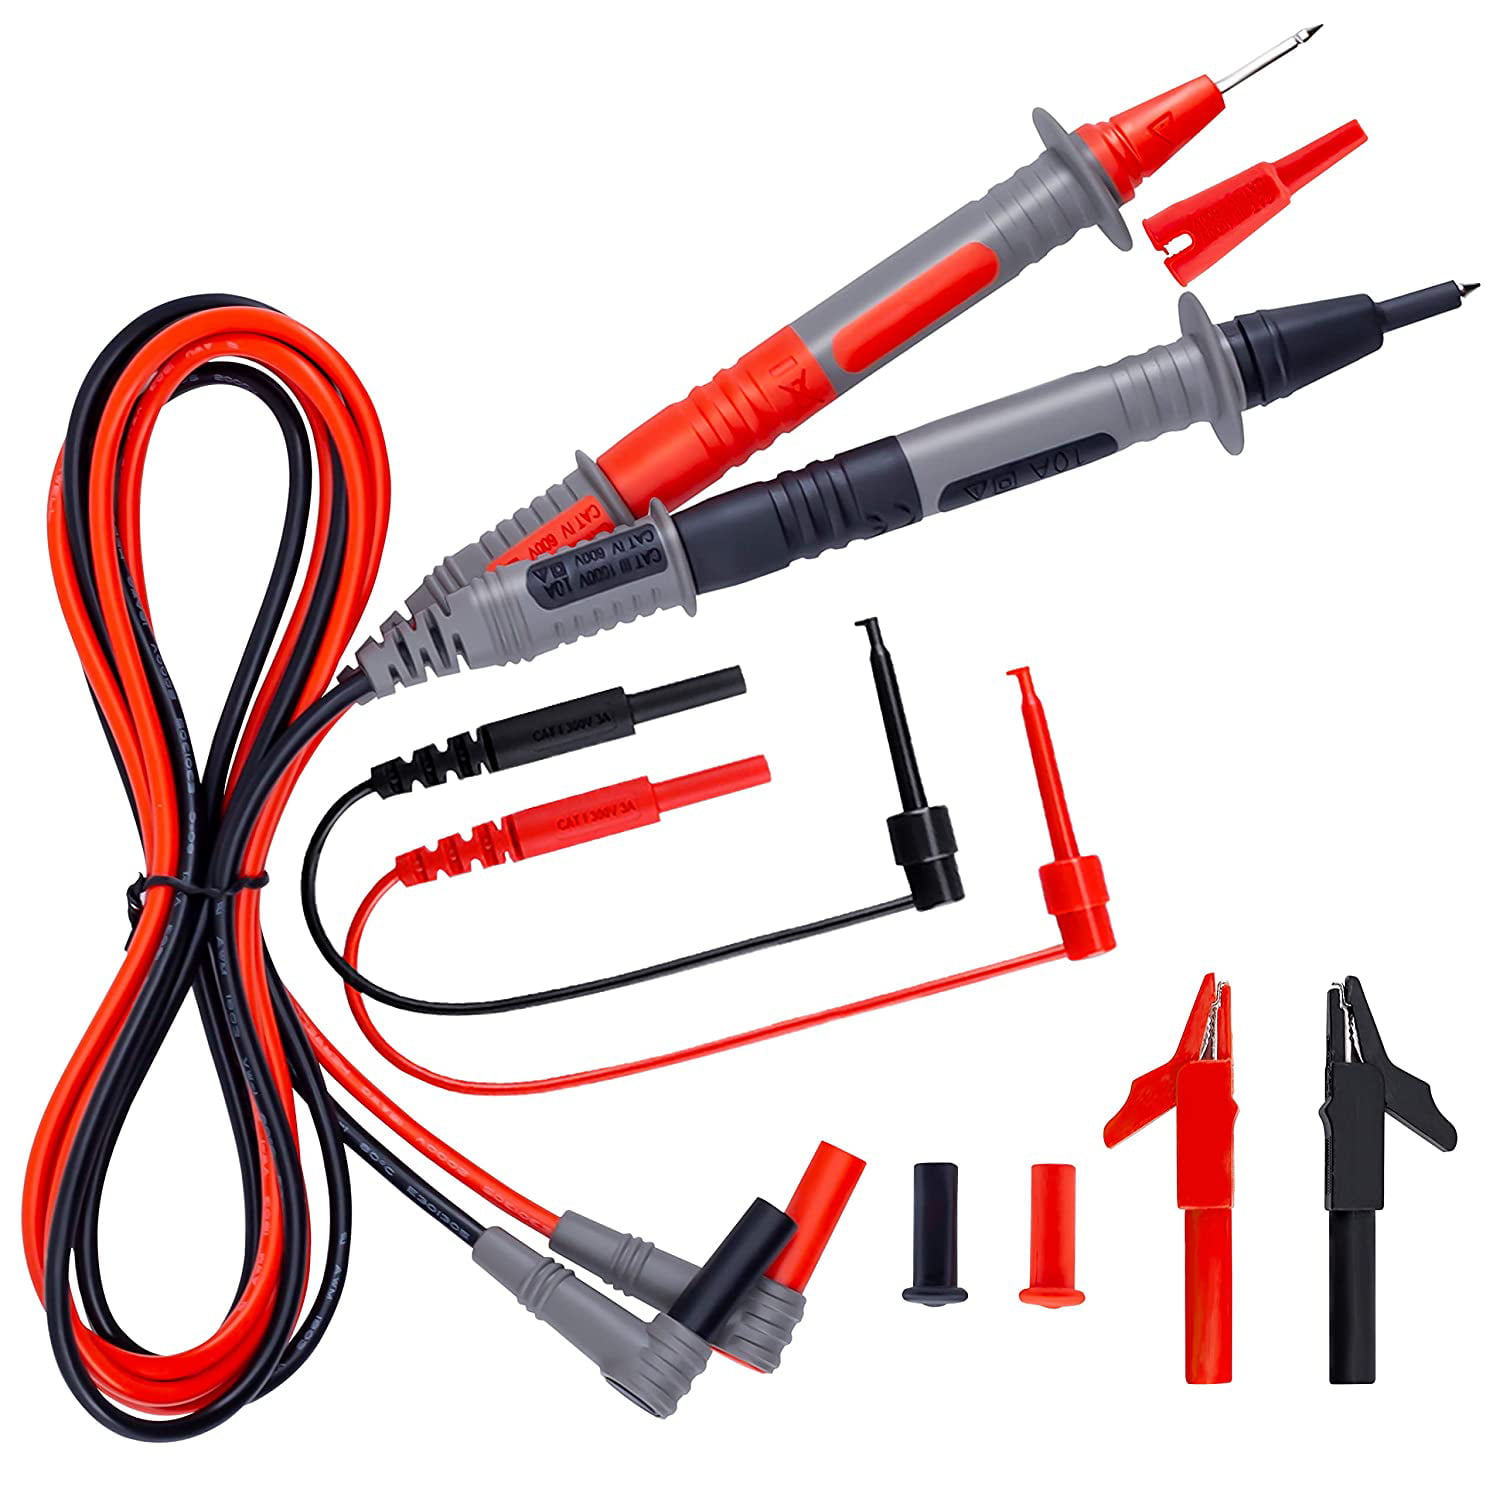 Electronic Test Lead Kit for Multimeter Tester Lead Probe Electronic Needle Clip 